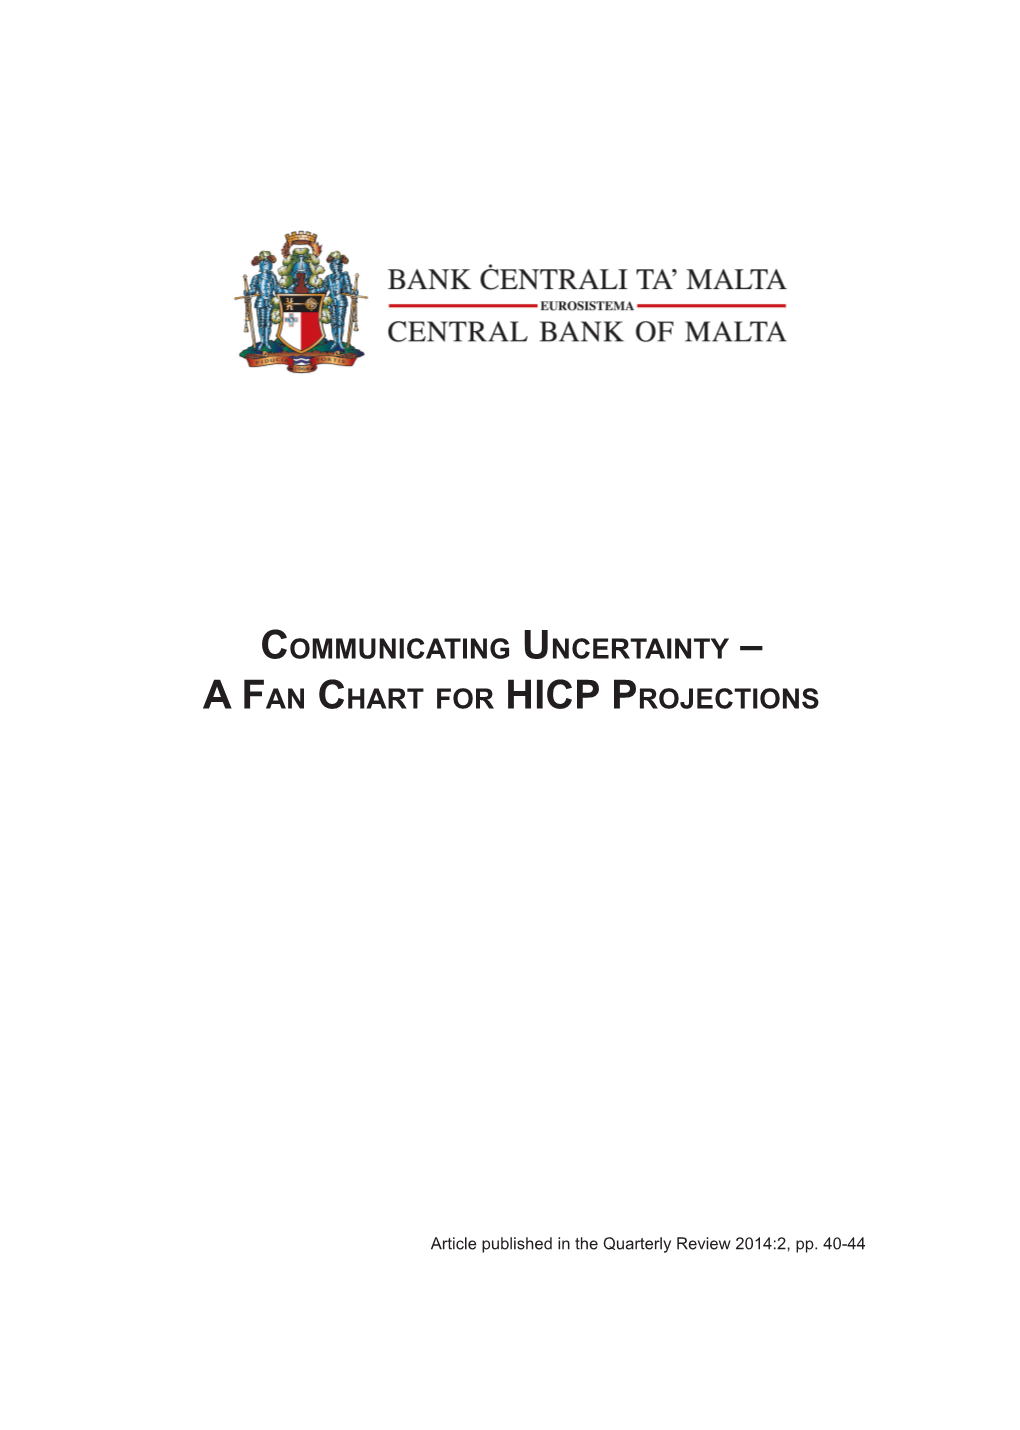 Communicating Uncertainty – a Fan Chart for HICP Projections